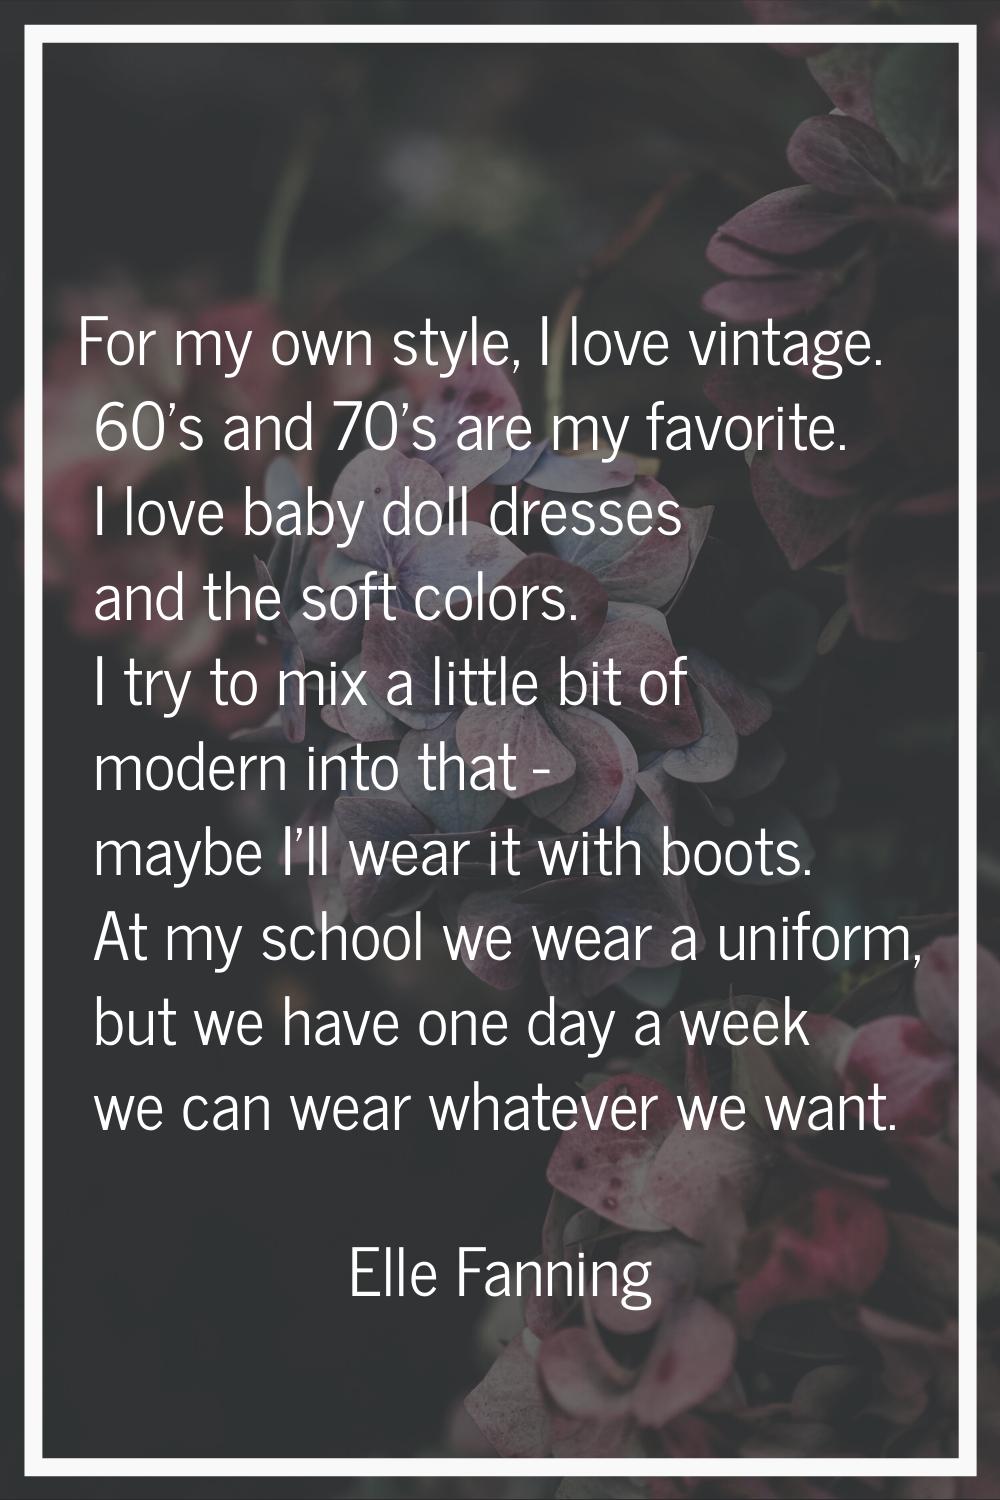 For my own style, I love vintage. 60's and 70's are my favorite. I love baby doll dresses and the s